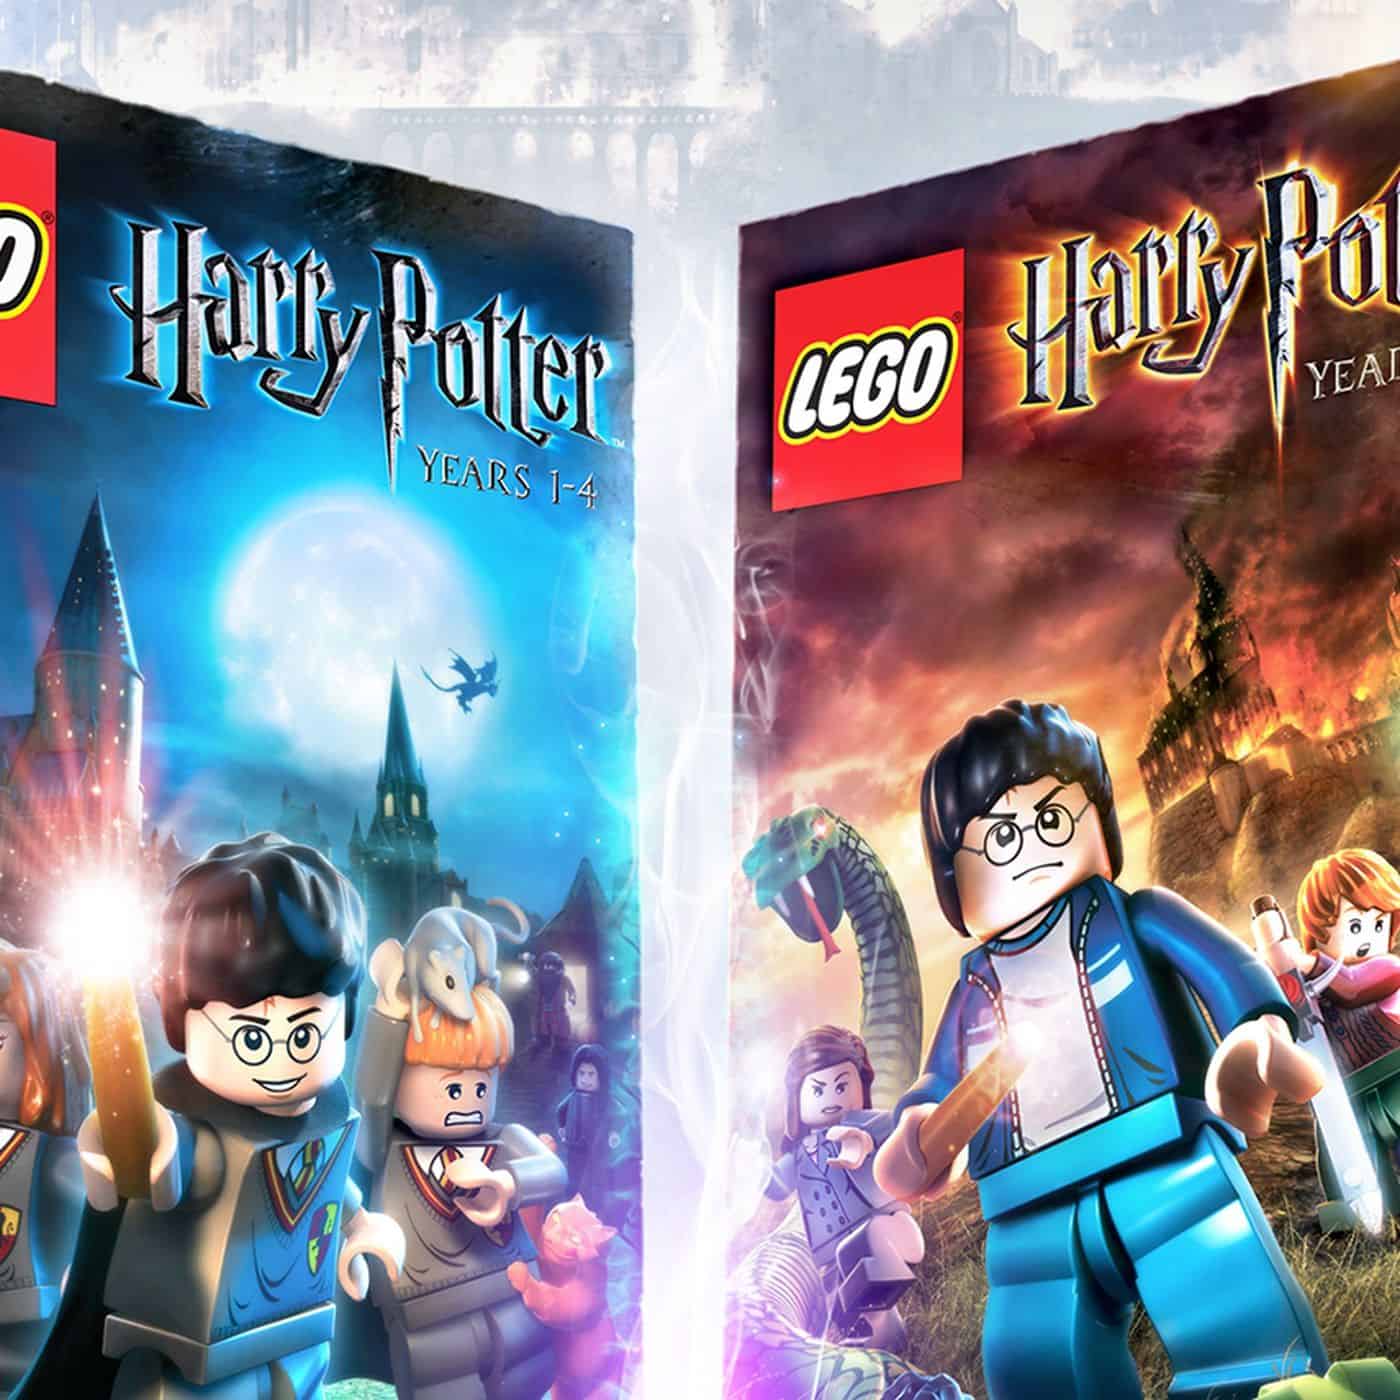 The LEGO Harry Potter Collection